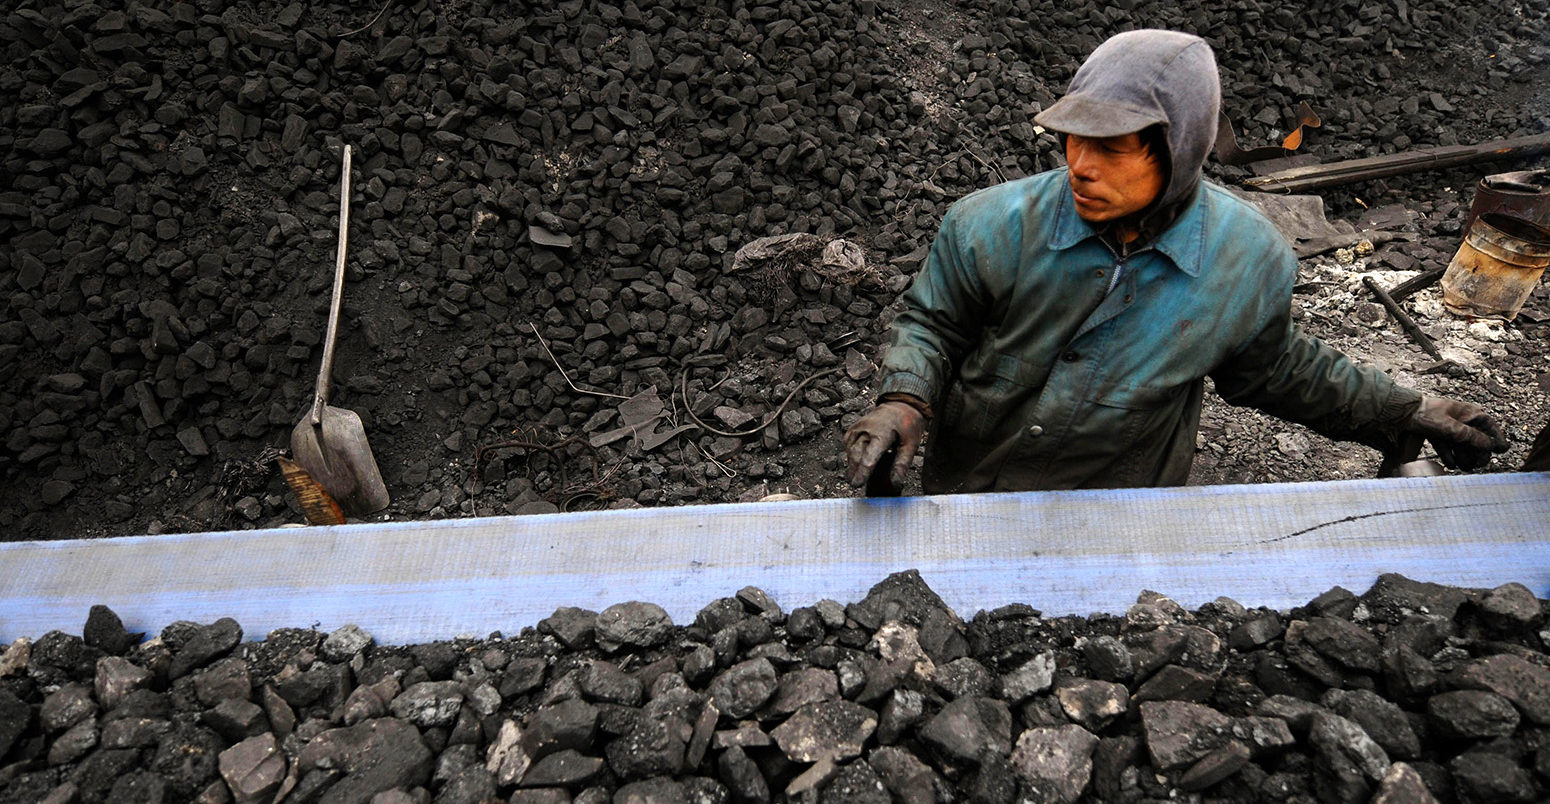 Miners prepare coal for transport at a coal mine site in Changzhi, China. Credit: CPRESS PHOTO LIMITED / Alamy Stock Photo. EX2865